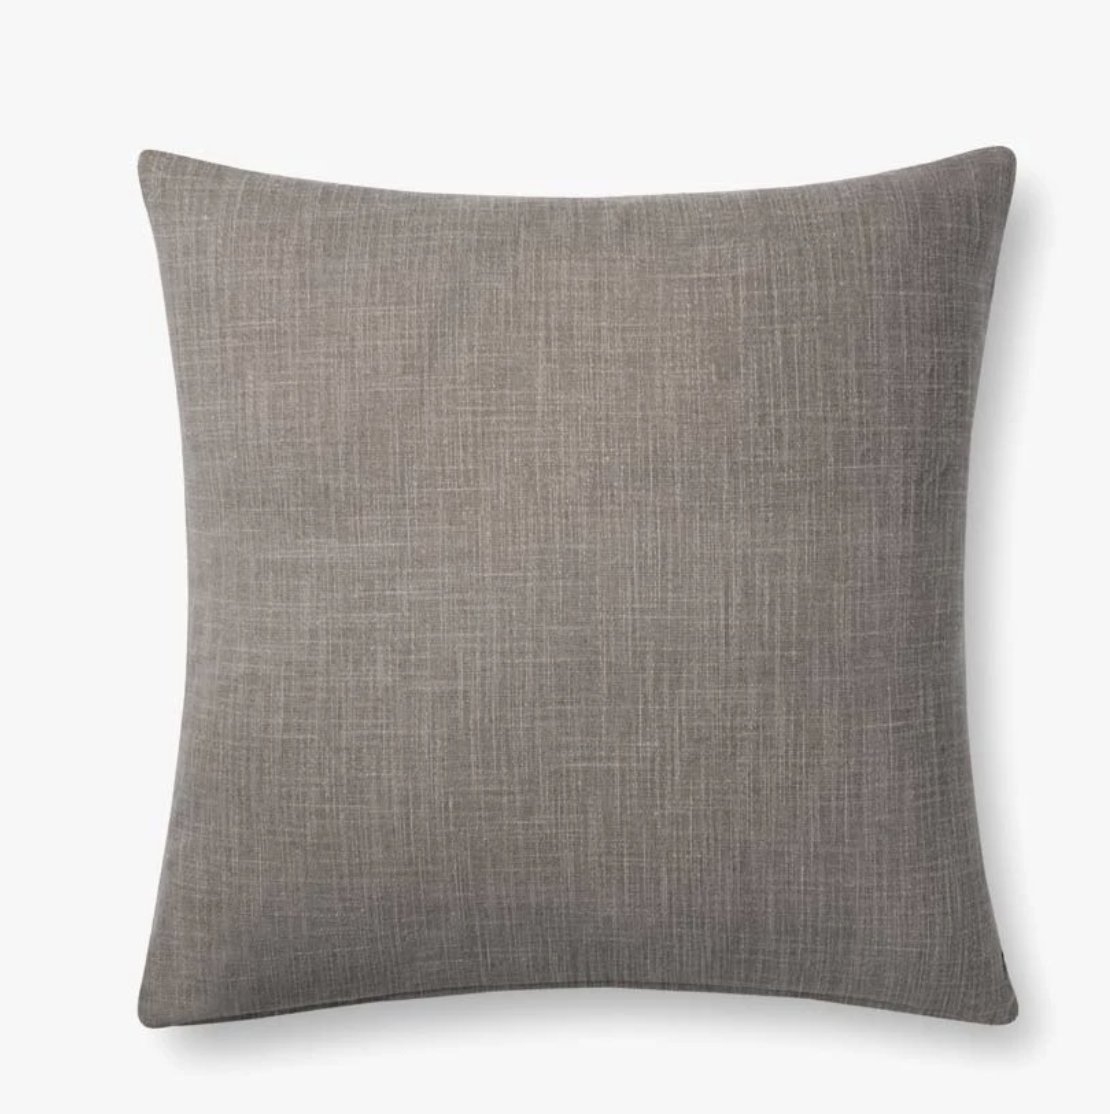 Loloi PILLOWS P0737 Charcoal / Grey 22" x 22" Cover w/Down - Image 1